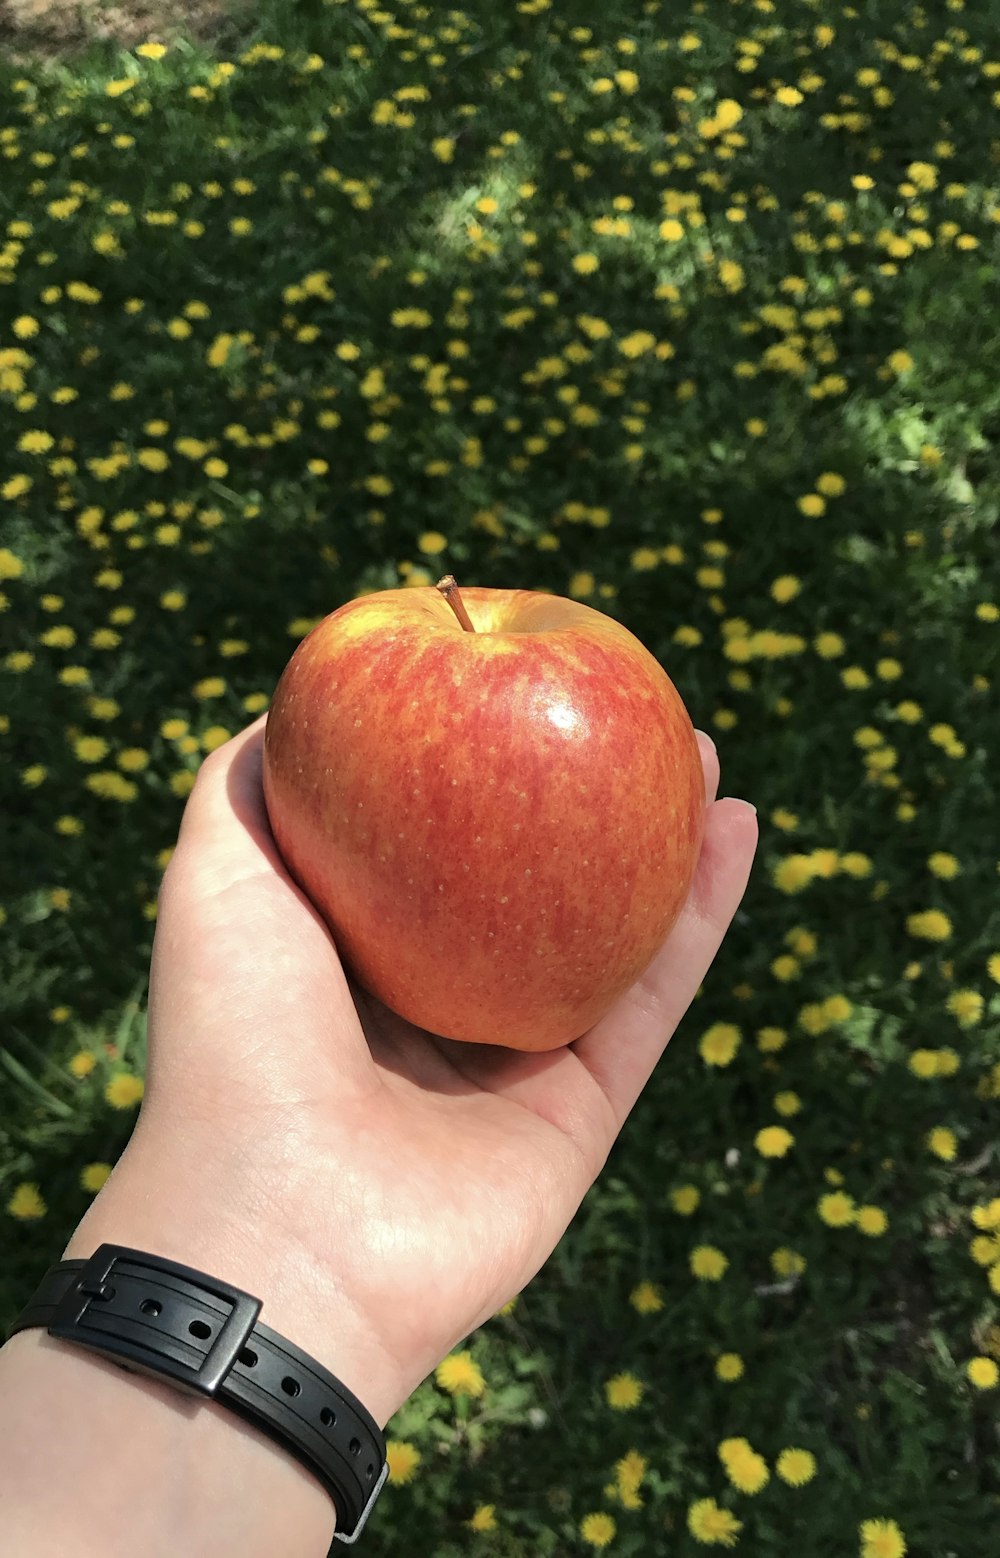 person holding red apple fruit